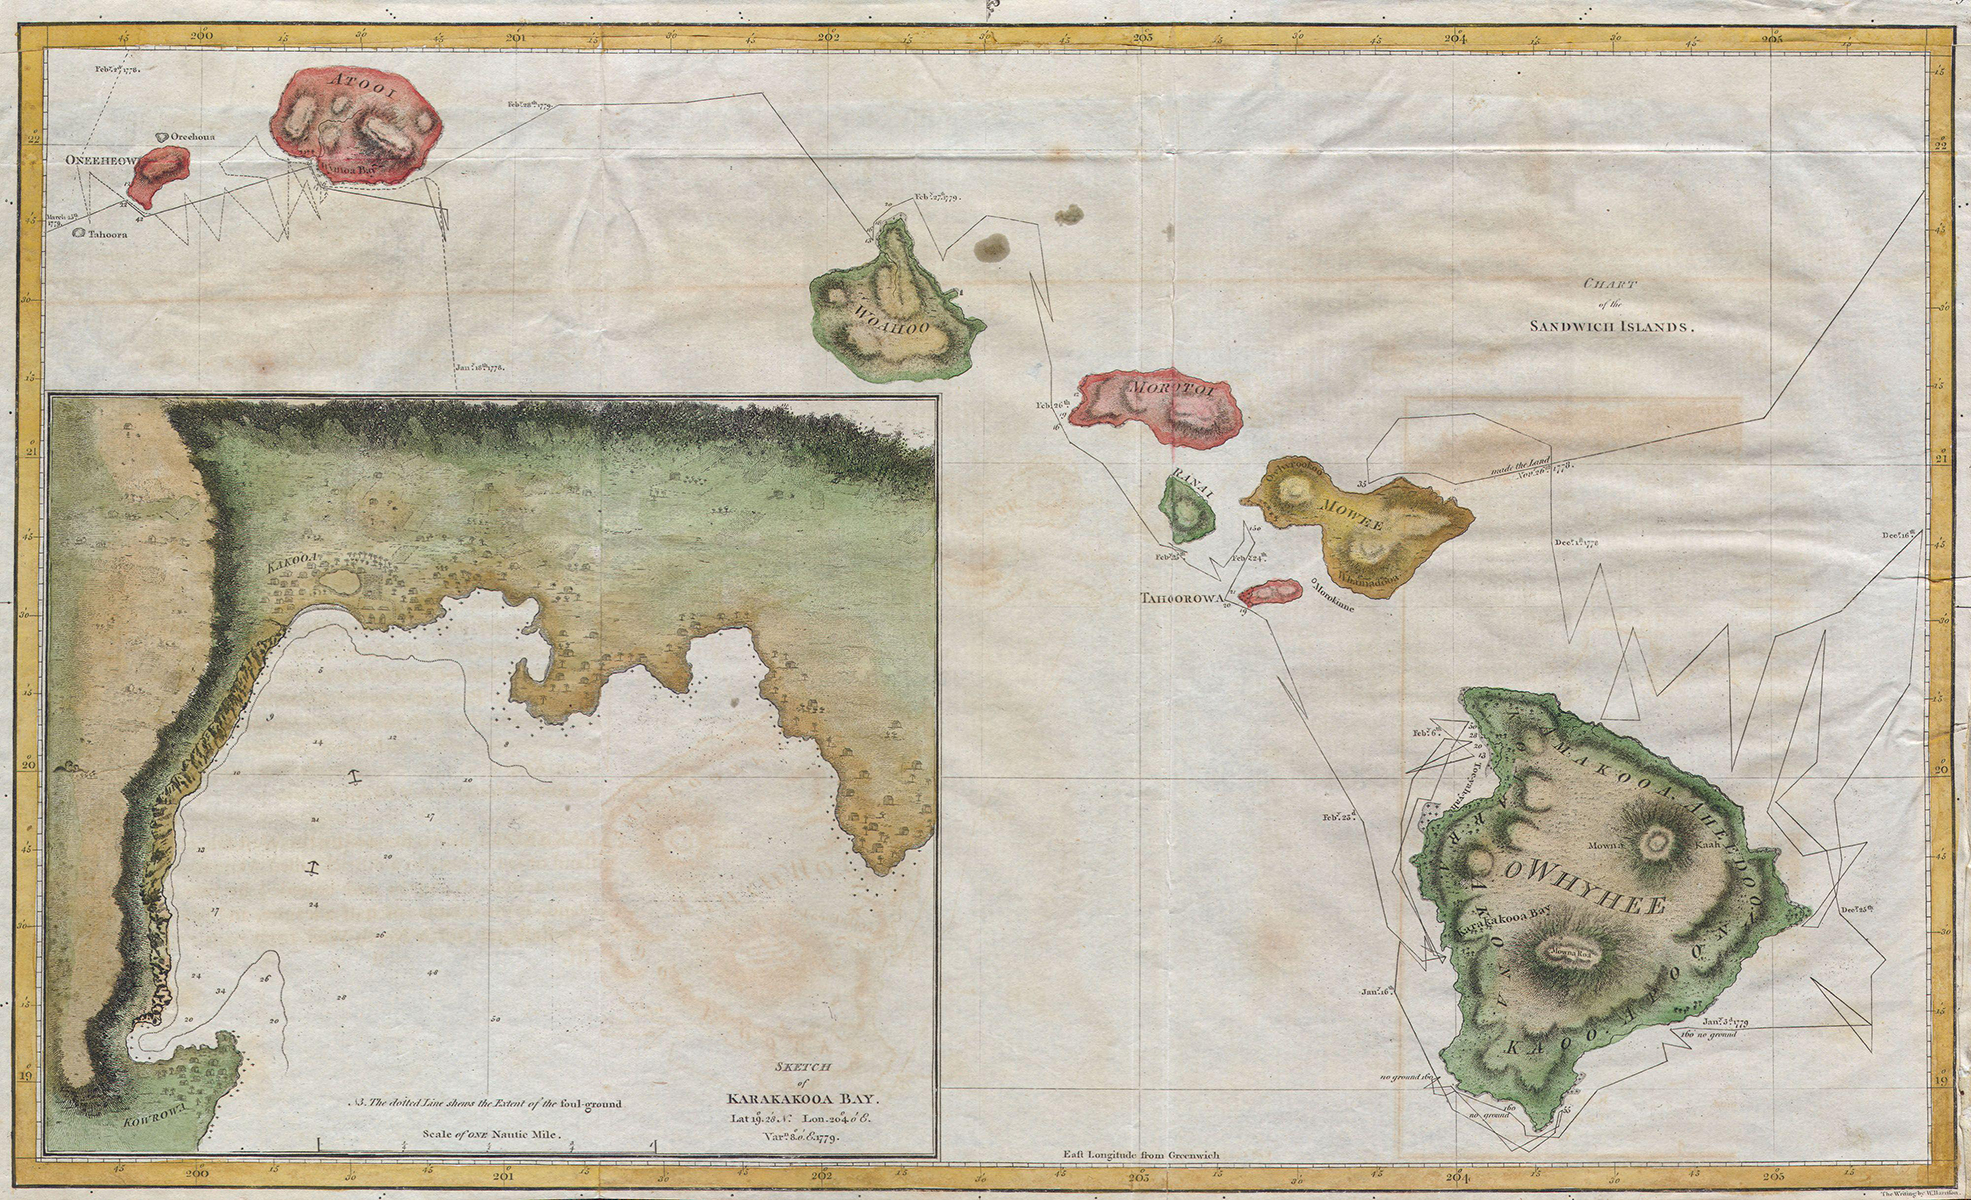 [Chart of the Sandwich Islands] By G. Nicol and T. Cadell.